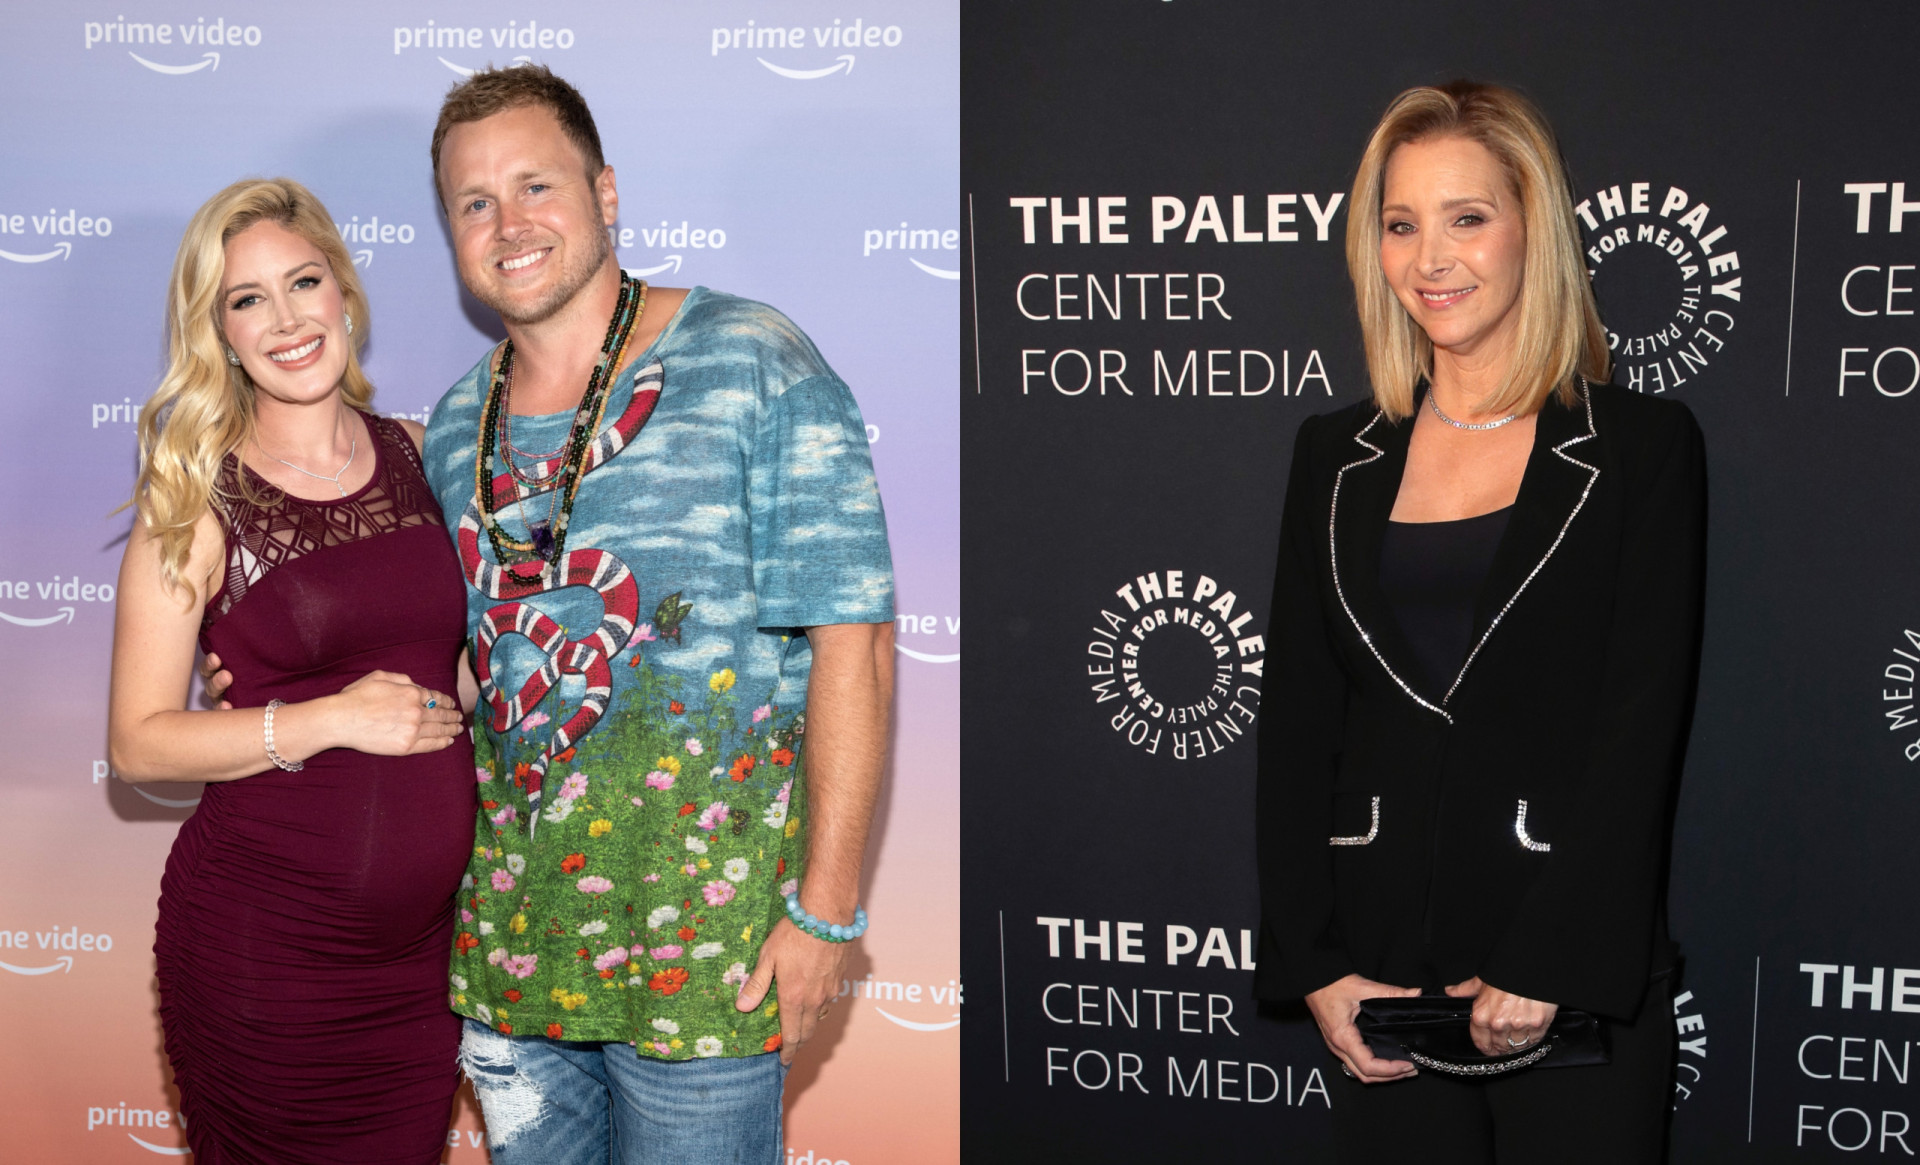 <p>Spencer Pratt, known for his appearance on 'The Hills,' caused a public feud when he claimed that Lisa Kudrow, known for her role as Phoebe on 'Friends,' was one of the rudest celebrities he's ever met.</p> <p>"The year was 2009 and Heidi [Montag, his wife] and I were invited to our first elite A-list party. It was clear when we got there, no one wanted us there." He said as they were enjoying themselves and "consuming a little caviar, Phoebe approaches, which was a little shocking as no one had spoken to us at all at the party.” He alleged that Kudrow then told his wife “right in front of me, that she needs to get away from me as fast as possible because I’m going to murder [her]," and that Kudrow told him he had “the eyes of a serial killer." Montag reportedly waited to see if it was a joke, but Kudrow allegedly just walked away, "and that right there was the rudest moment I’ve ever encountered with a human being," Pratt concluded. </p><p>You may also like:<a href="https://www.starsinsider.com/n/404761?utm_source=msn.com&utm_medium=display&utm_campaign=referral_description&utm_content=570915en-en"> Celebs reveal their struggles with acne</a></p>